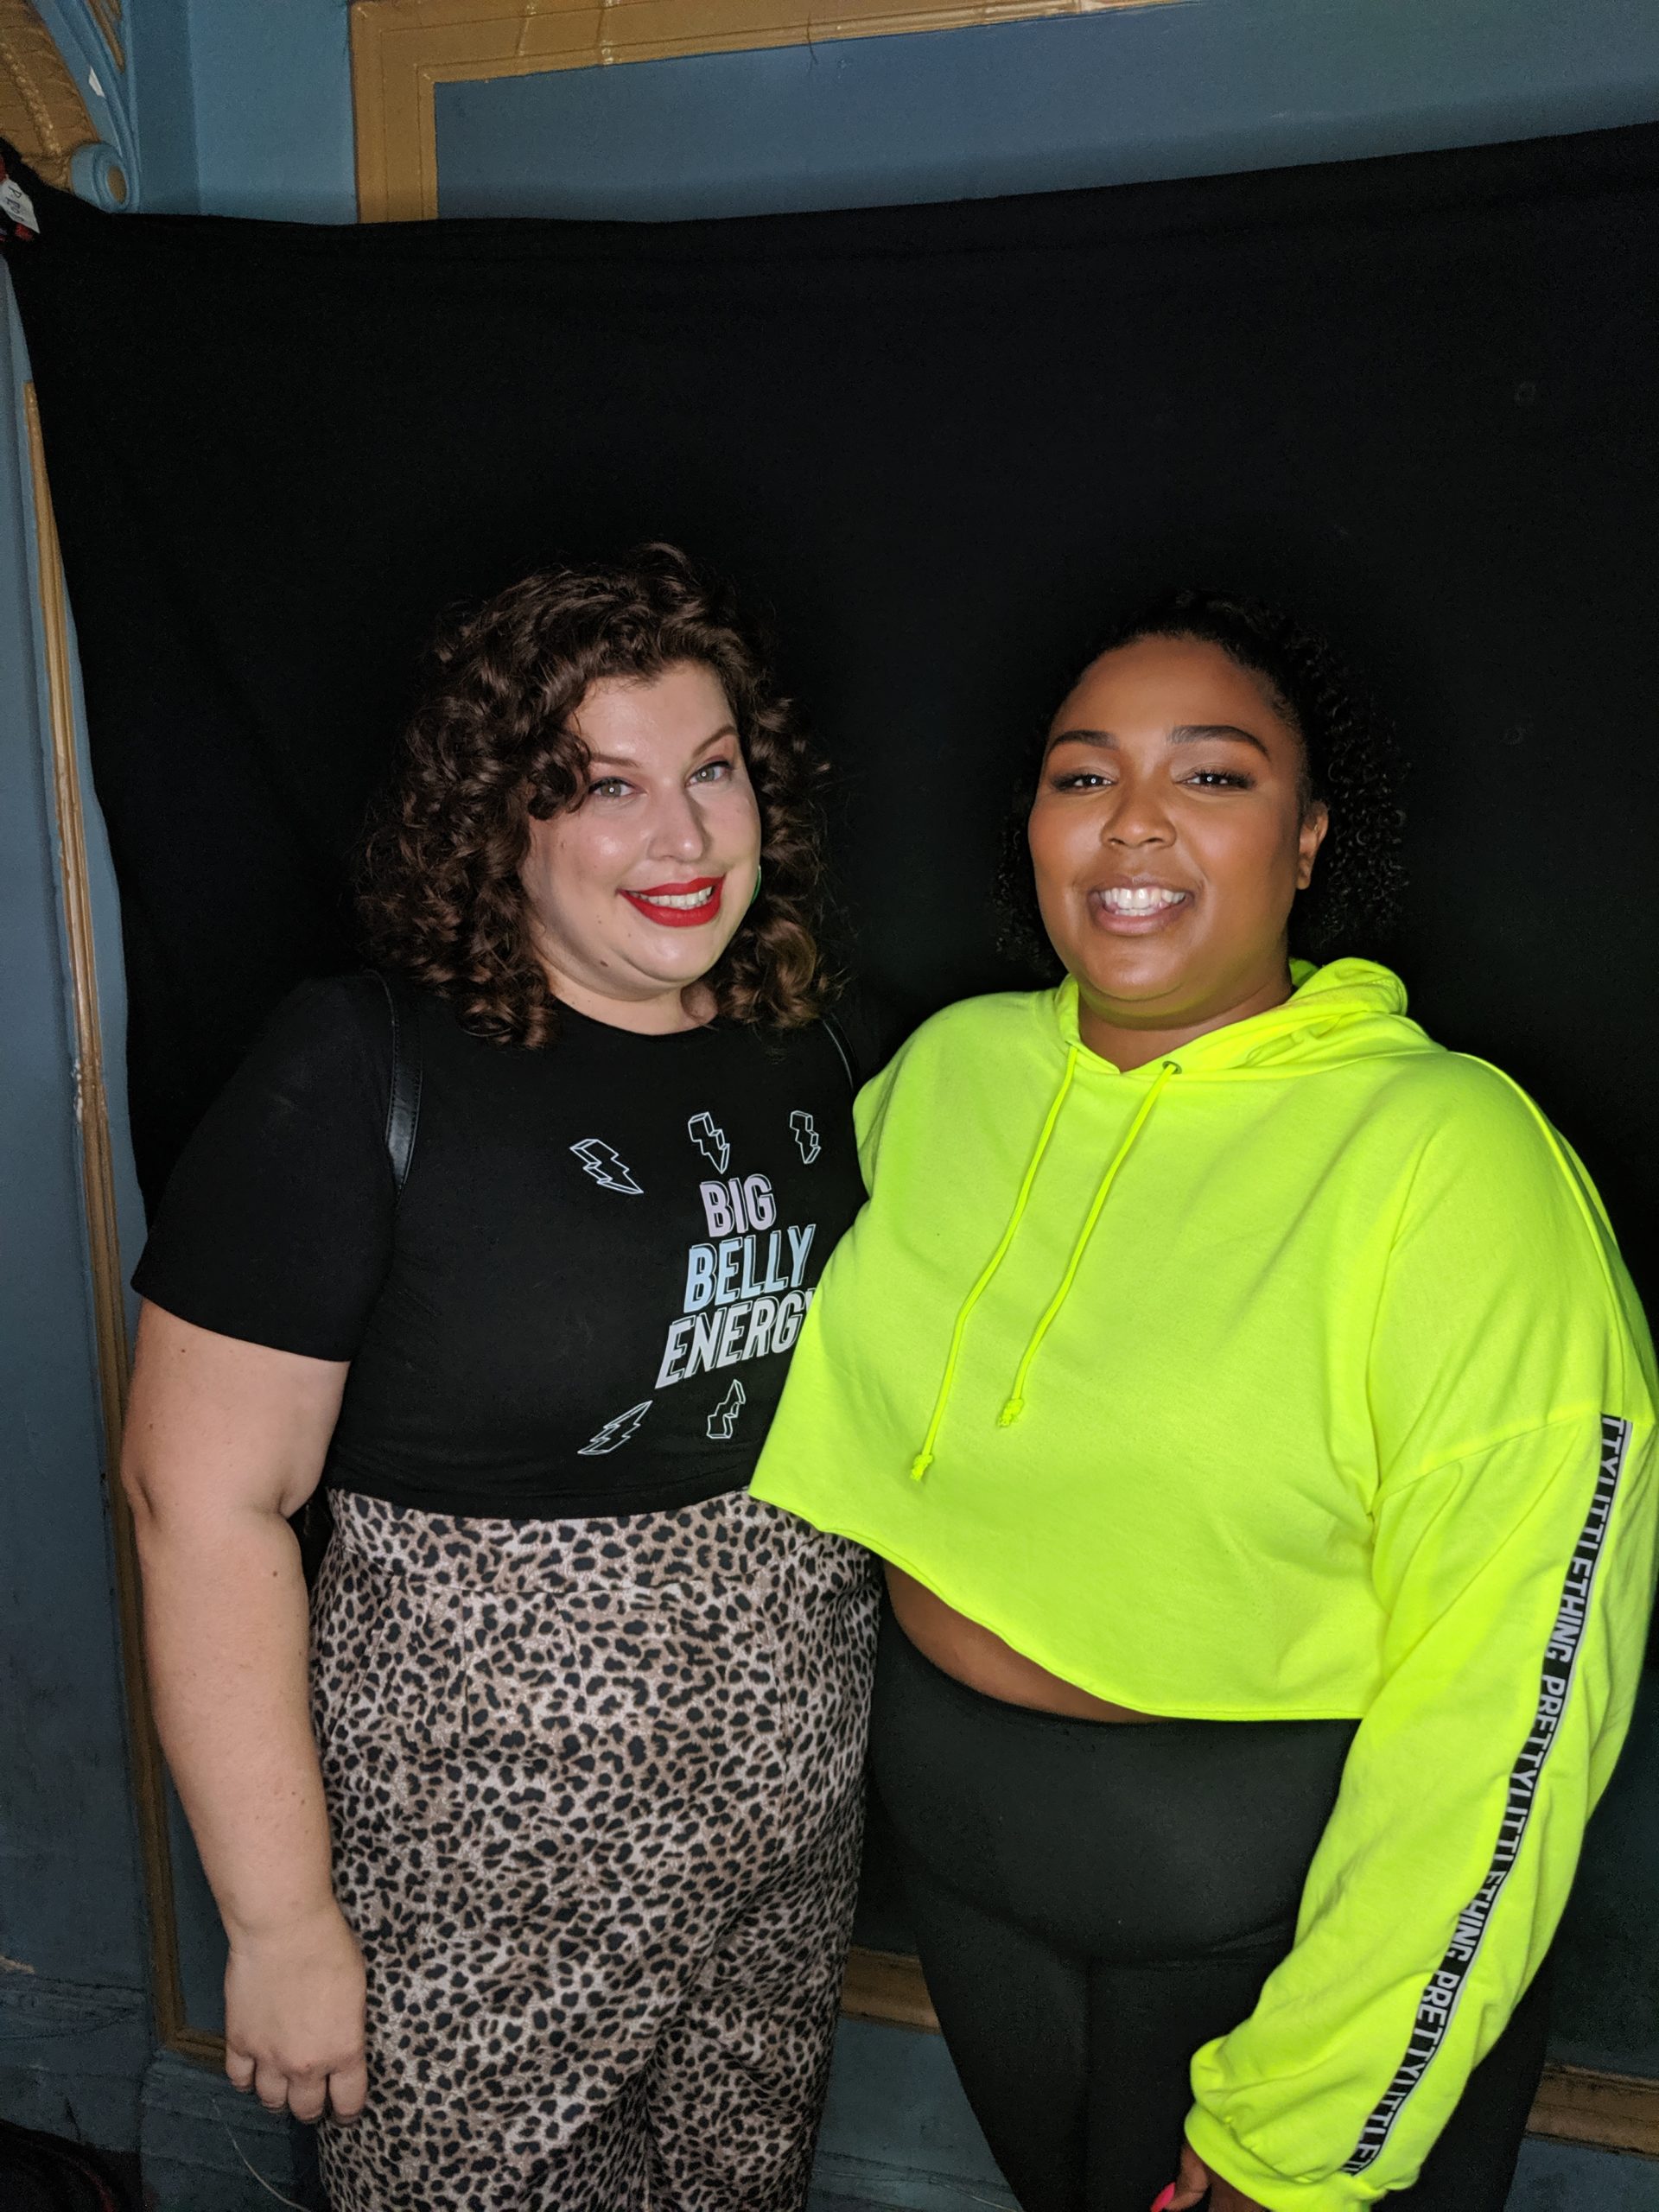 Lora posing with Lizzo.